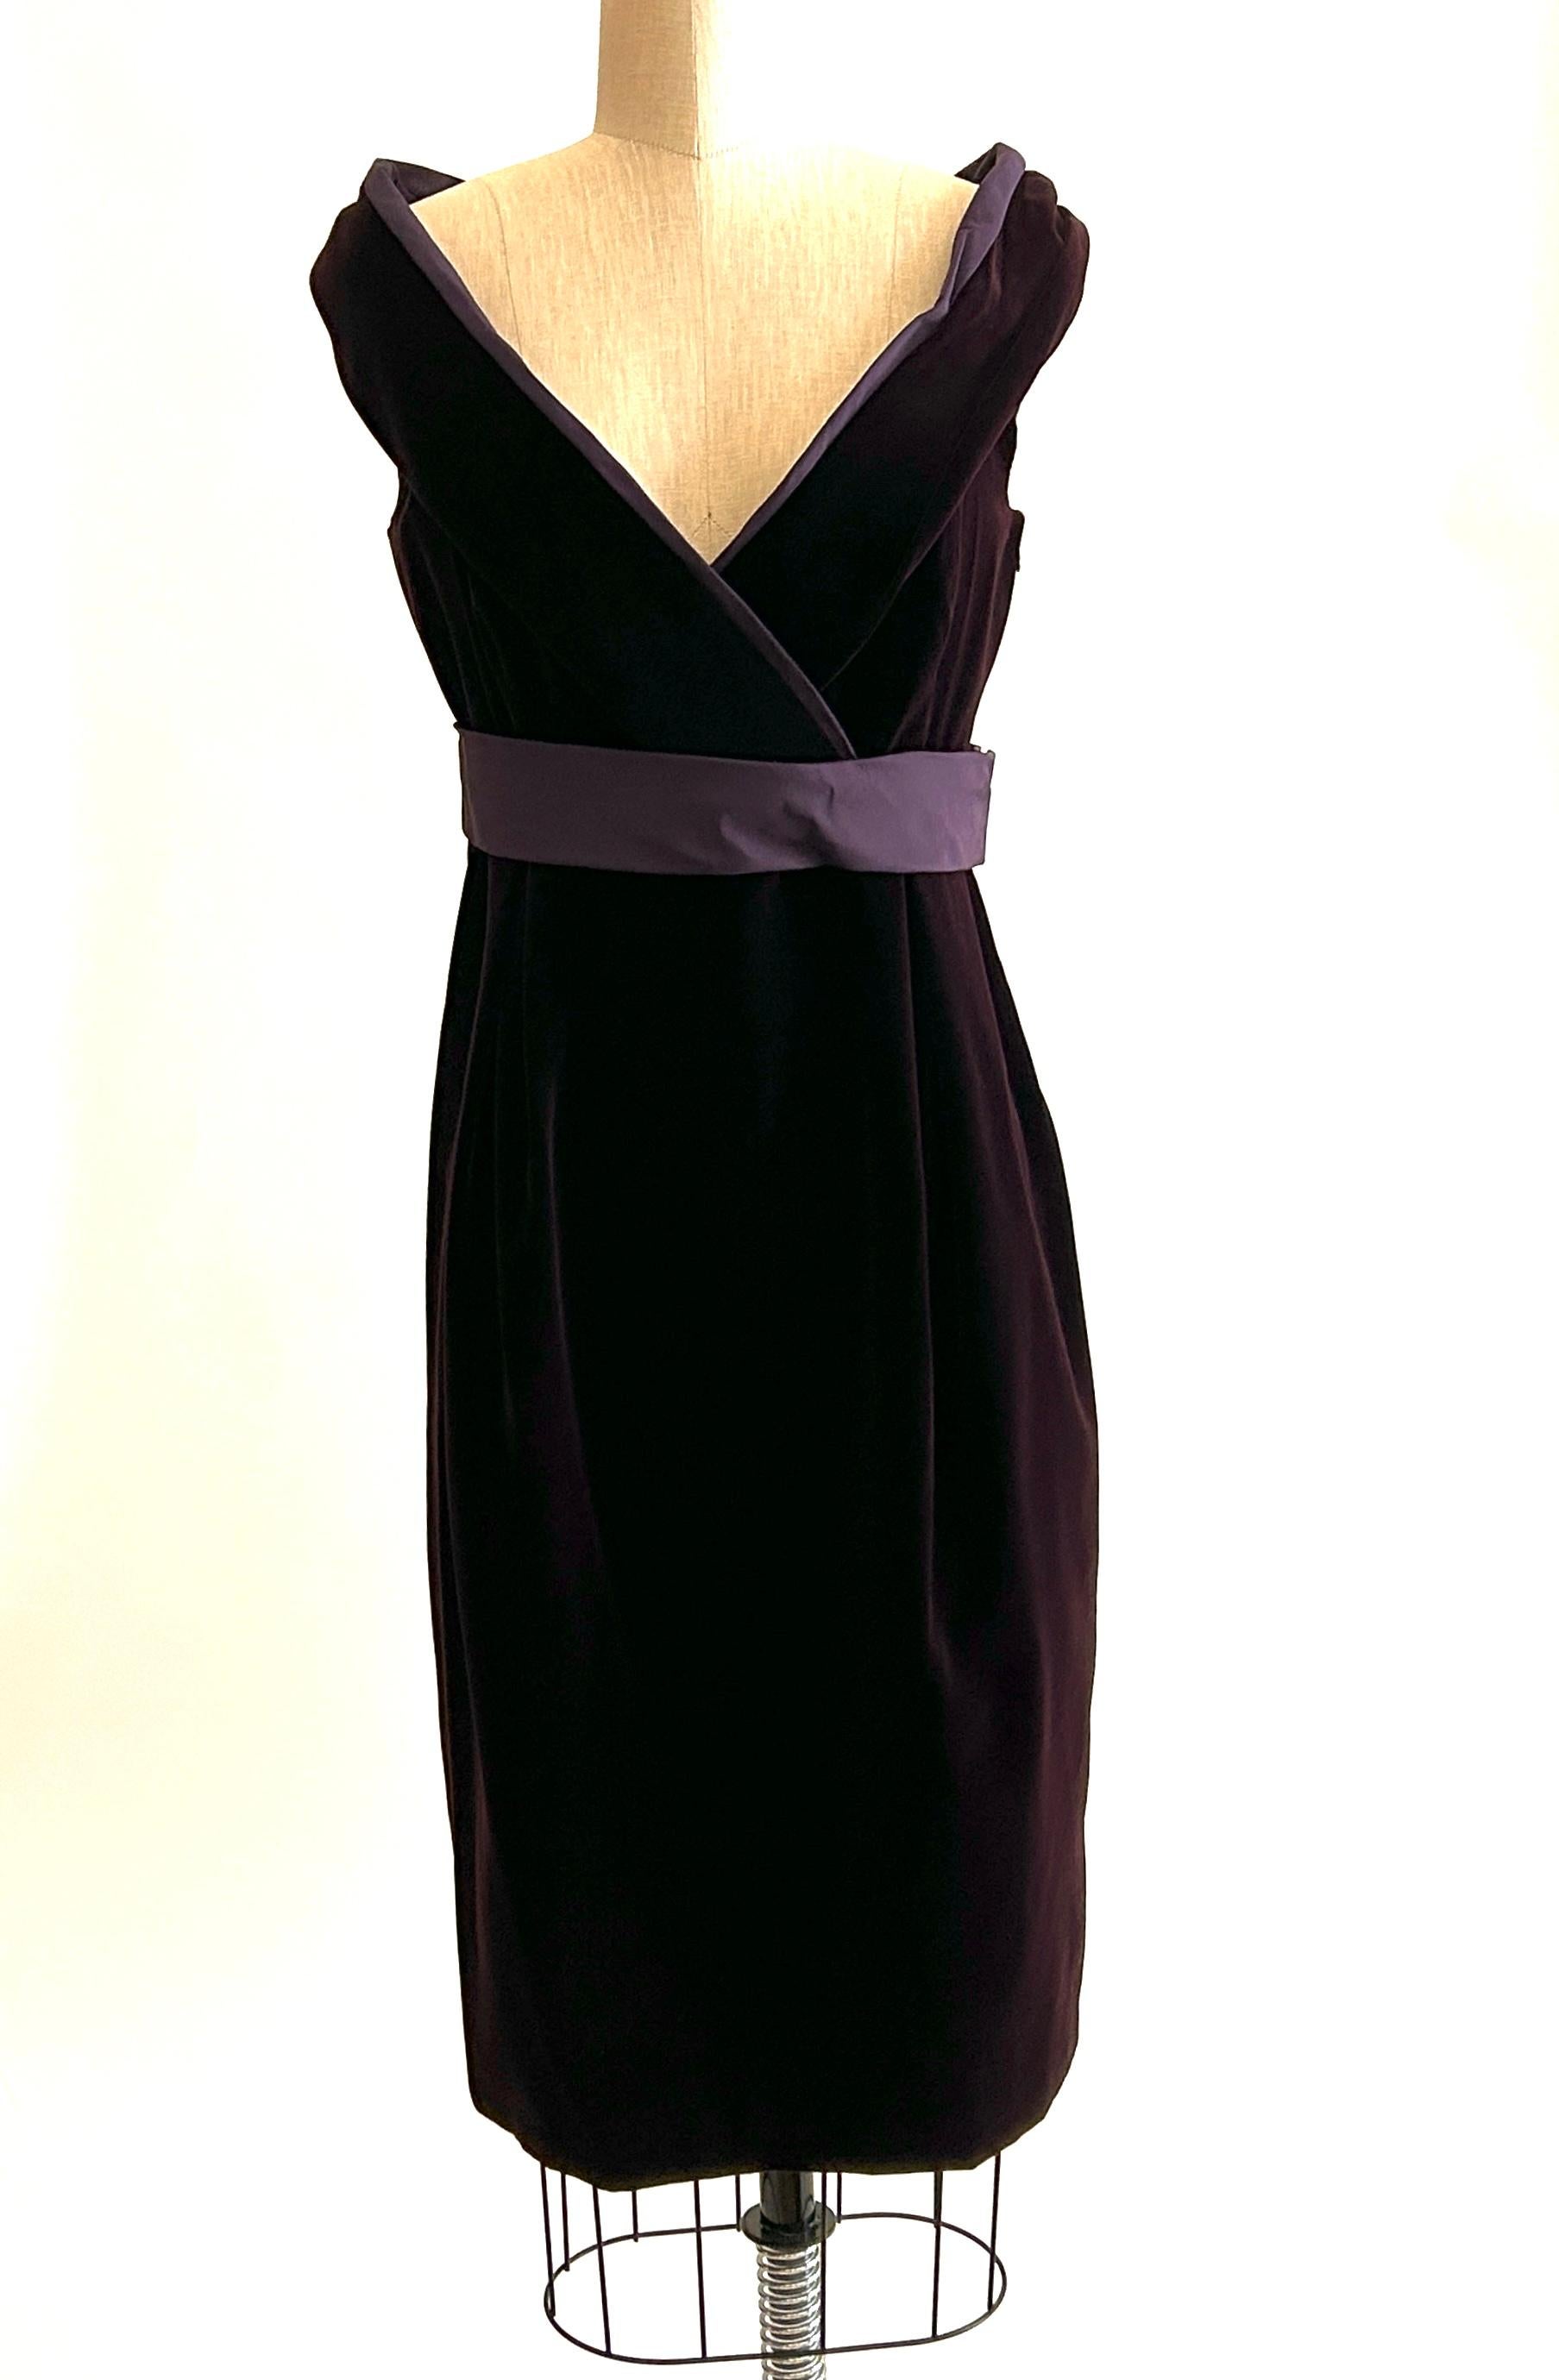 Alexander McQueen purple velvet dress with portrait collar from the 2000s. Neckline is just slightly off the shoulder with a sculpturally draped effect and a peekaboo interior trim in purple grosgrain. Two pleats at side front waist and two more at